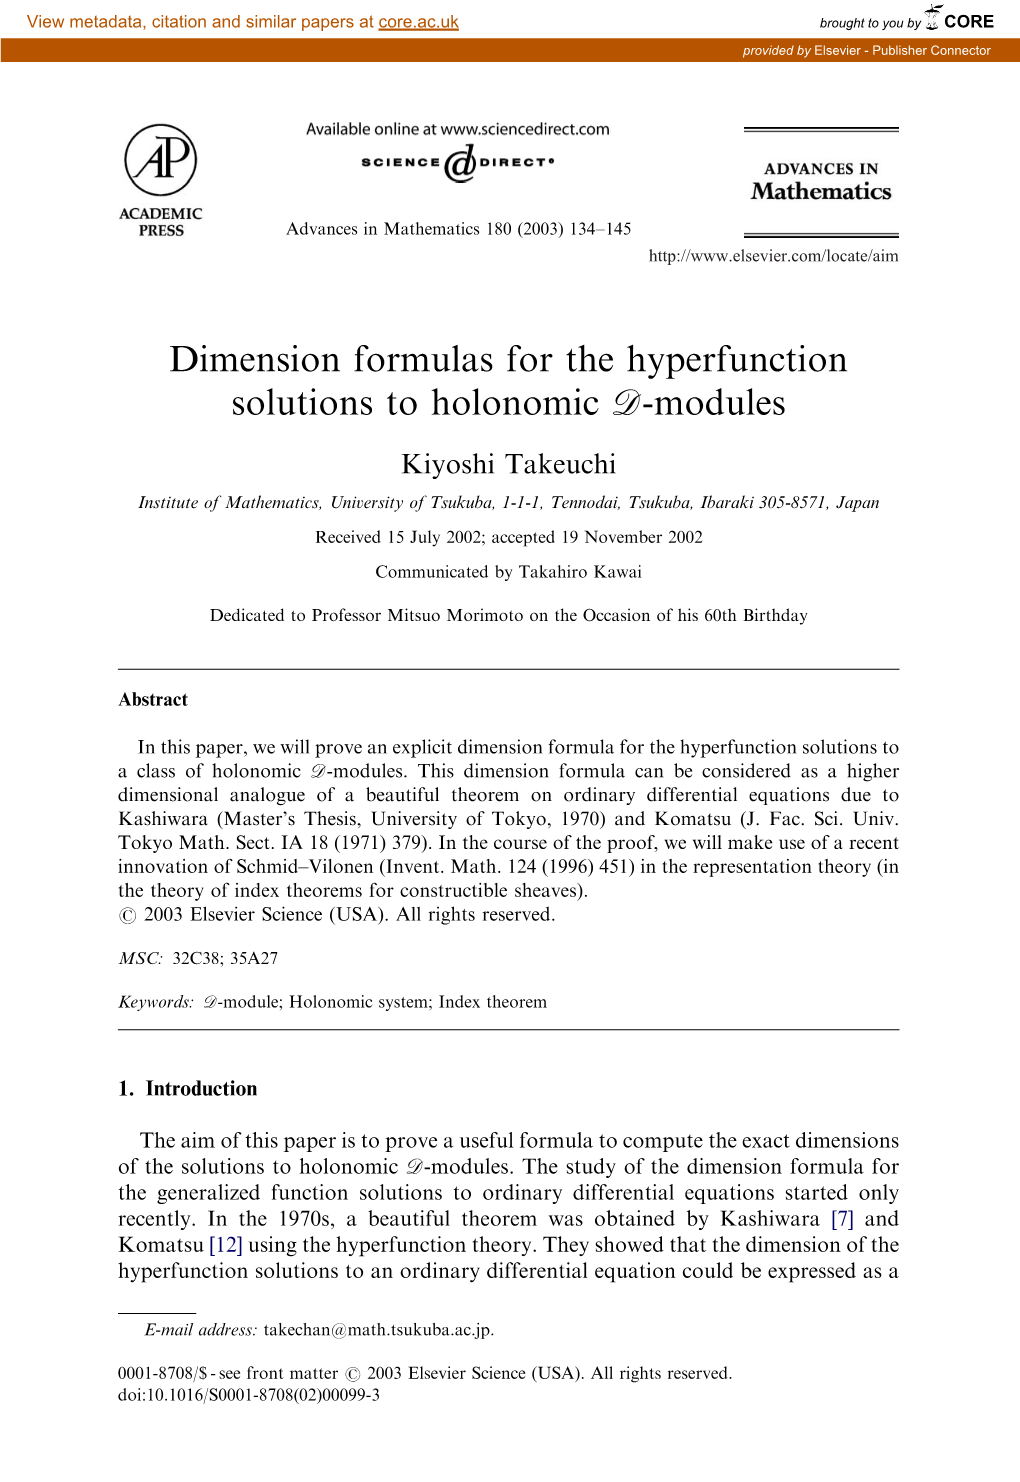 Dimension Formulas for the Hyperfunction Solutions to Holonomic D-Modules